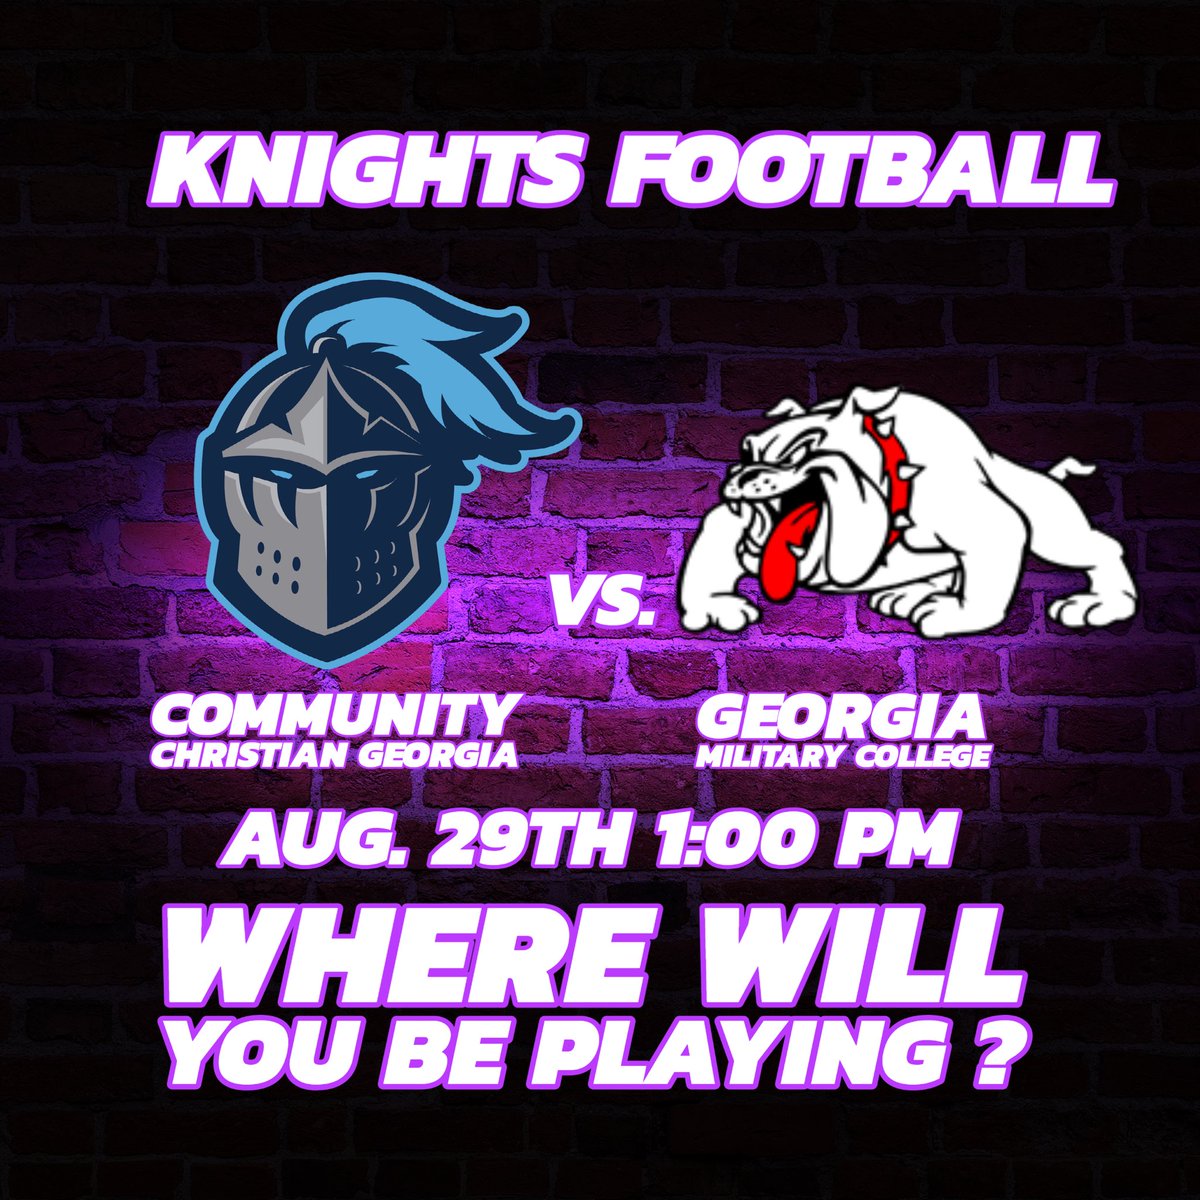 Where will you be? At home or on the field? DM me to get on the field 23’s